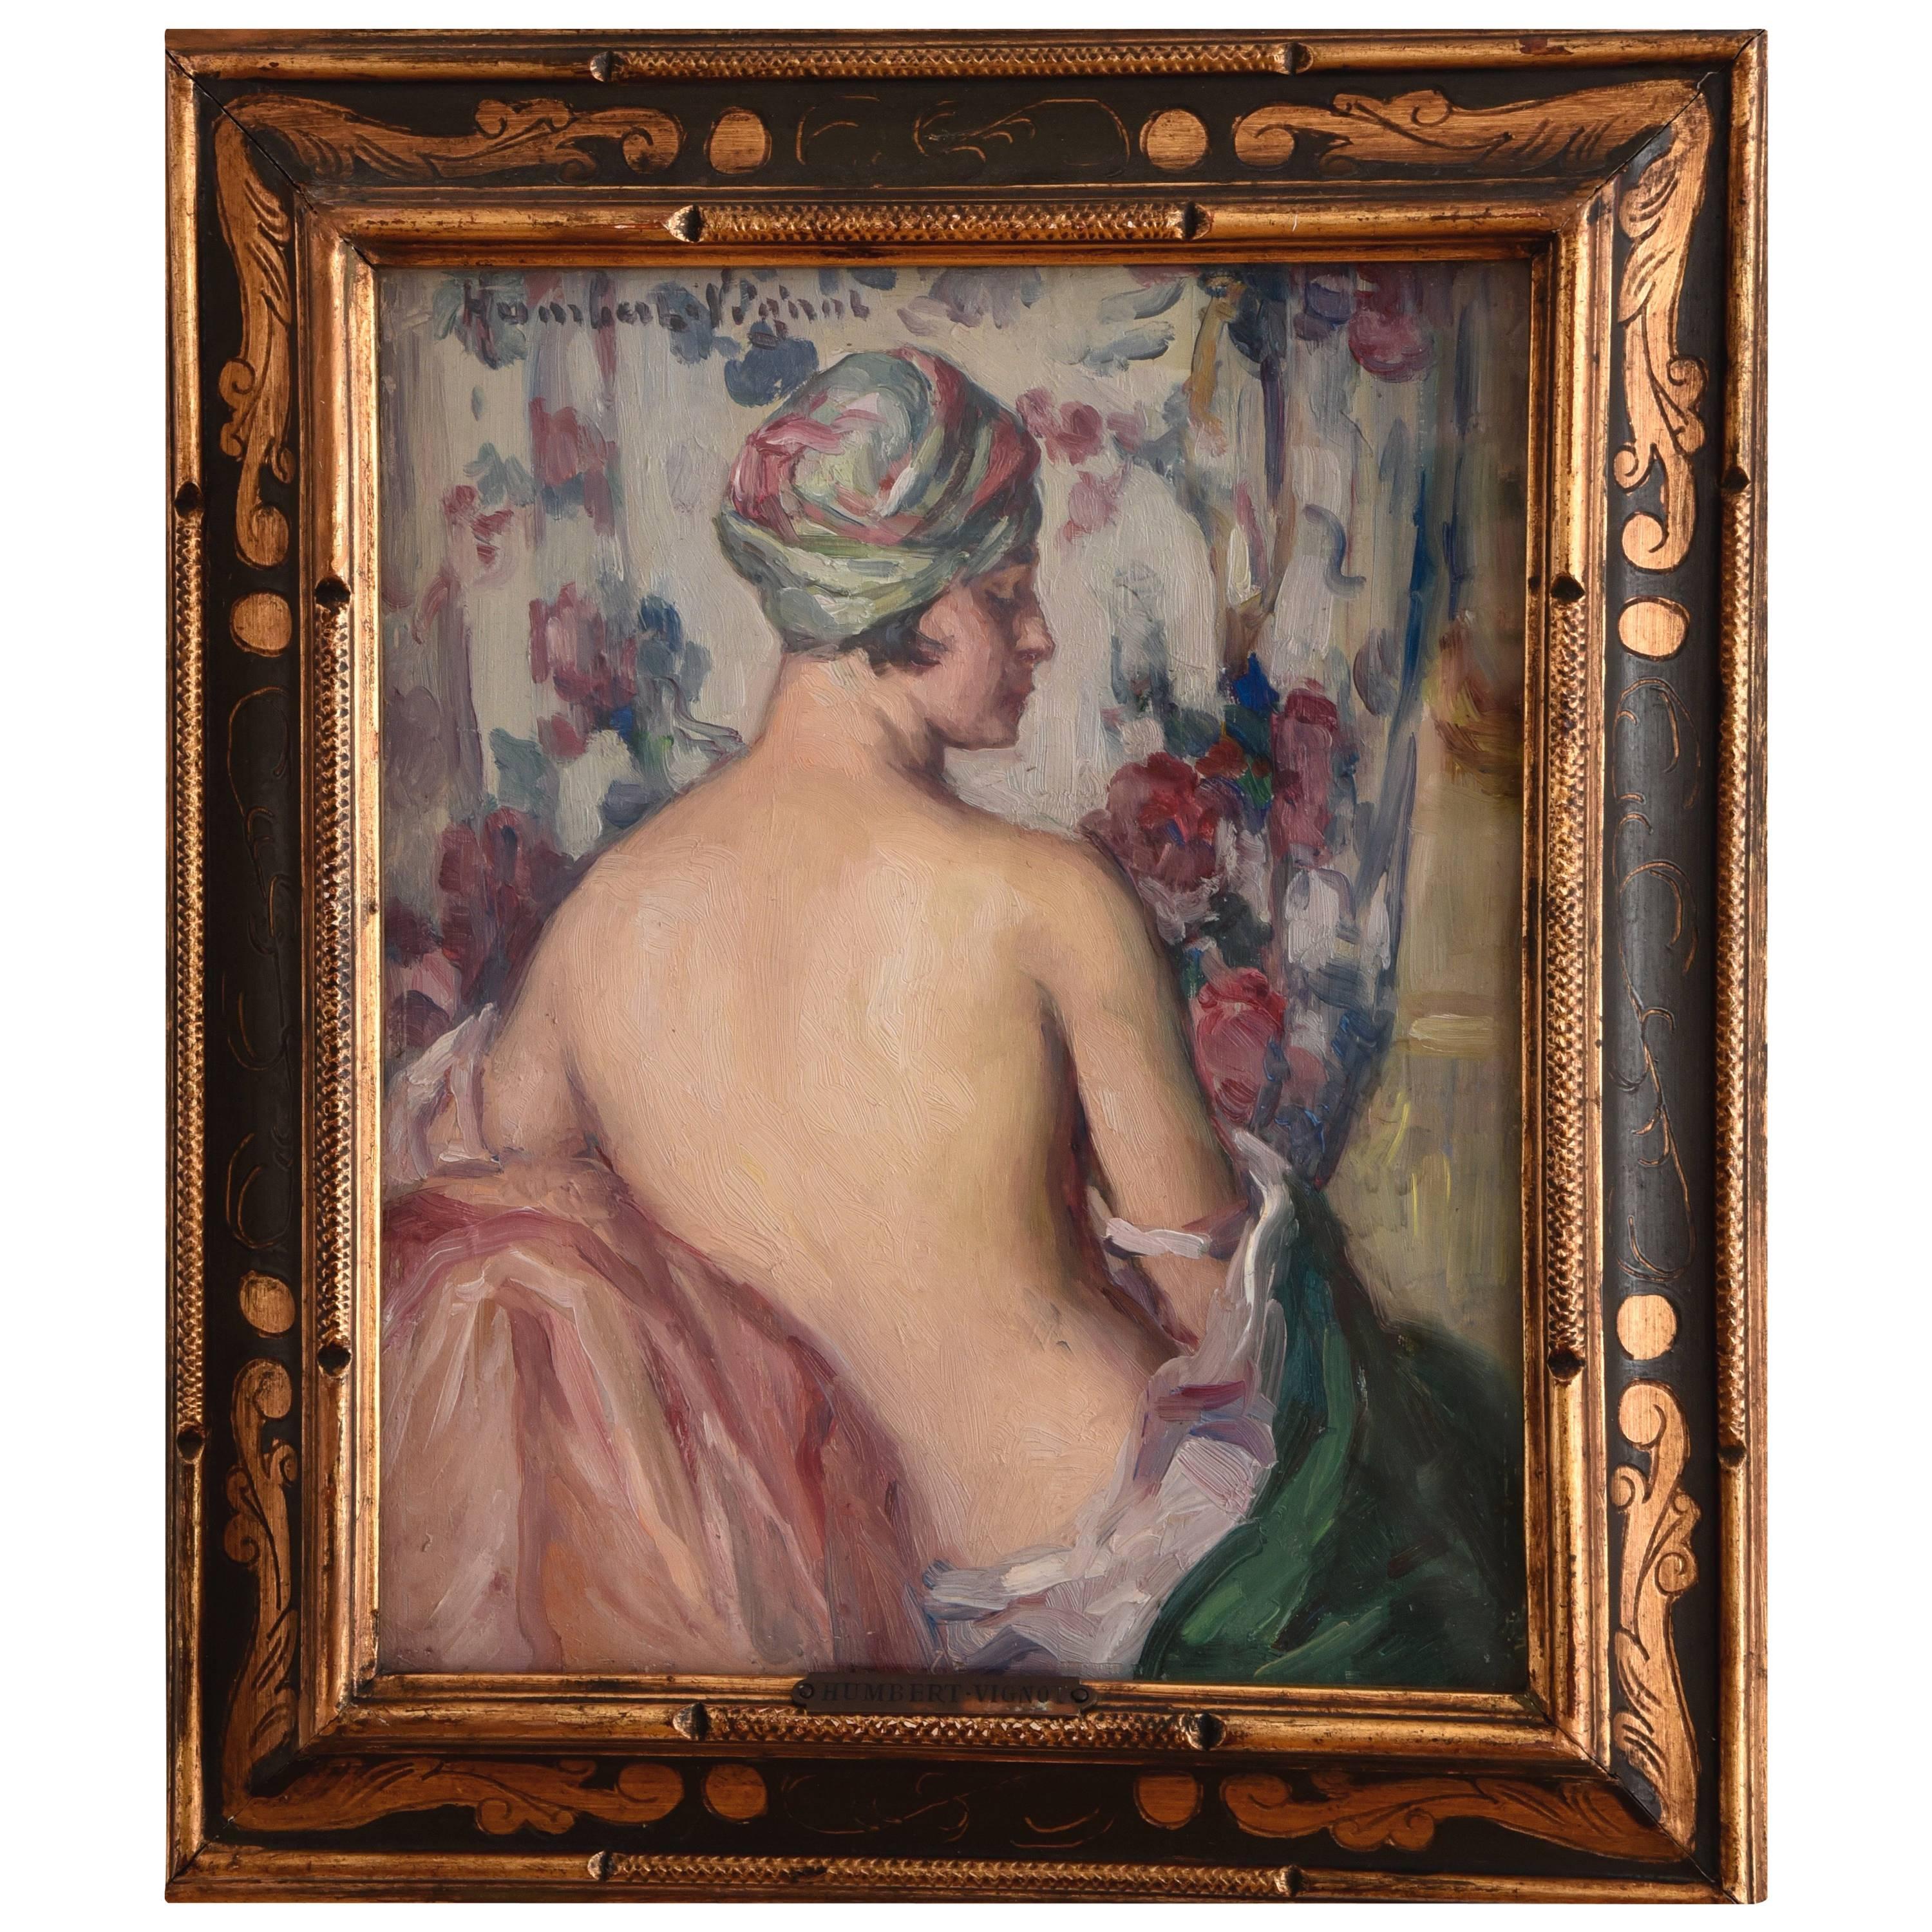 French Art Deco Painting, Nude with Turban by Léonie Humbert Vignot, 1920